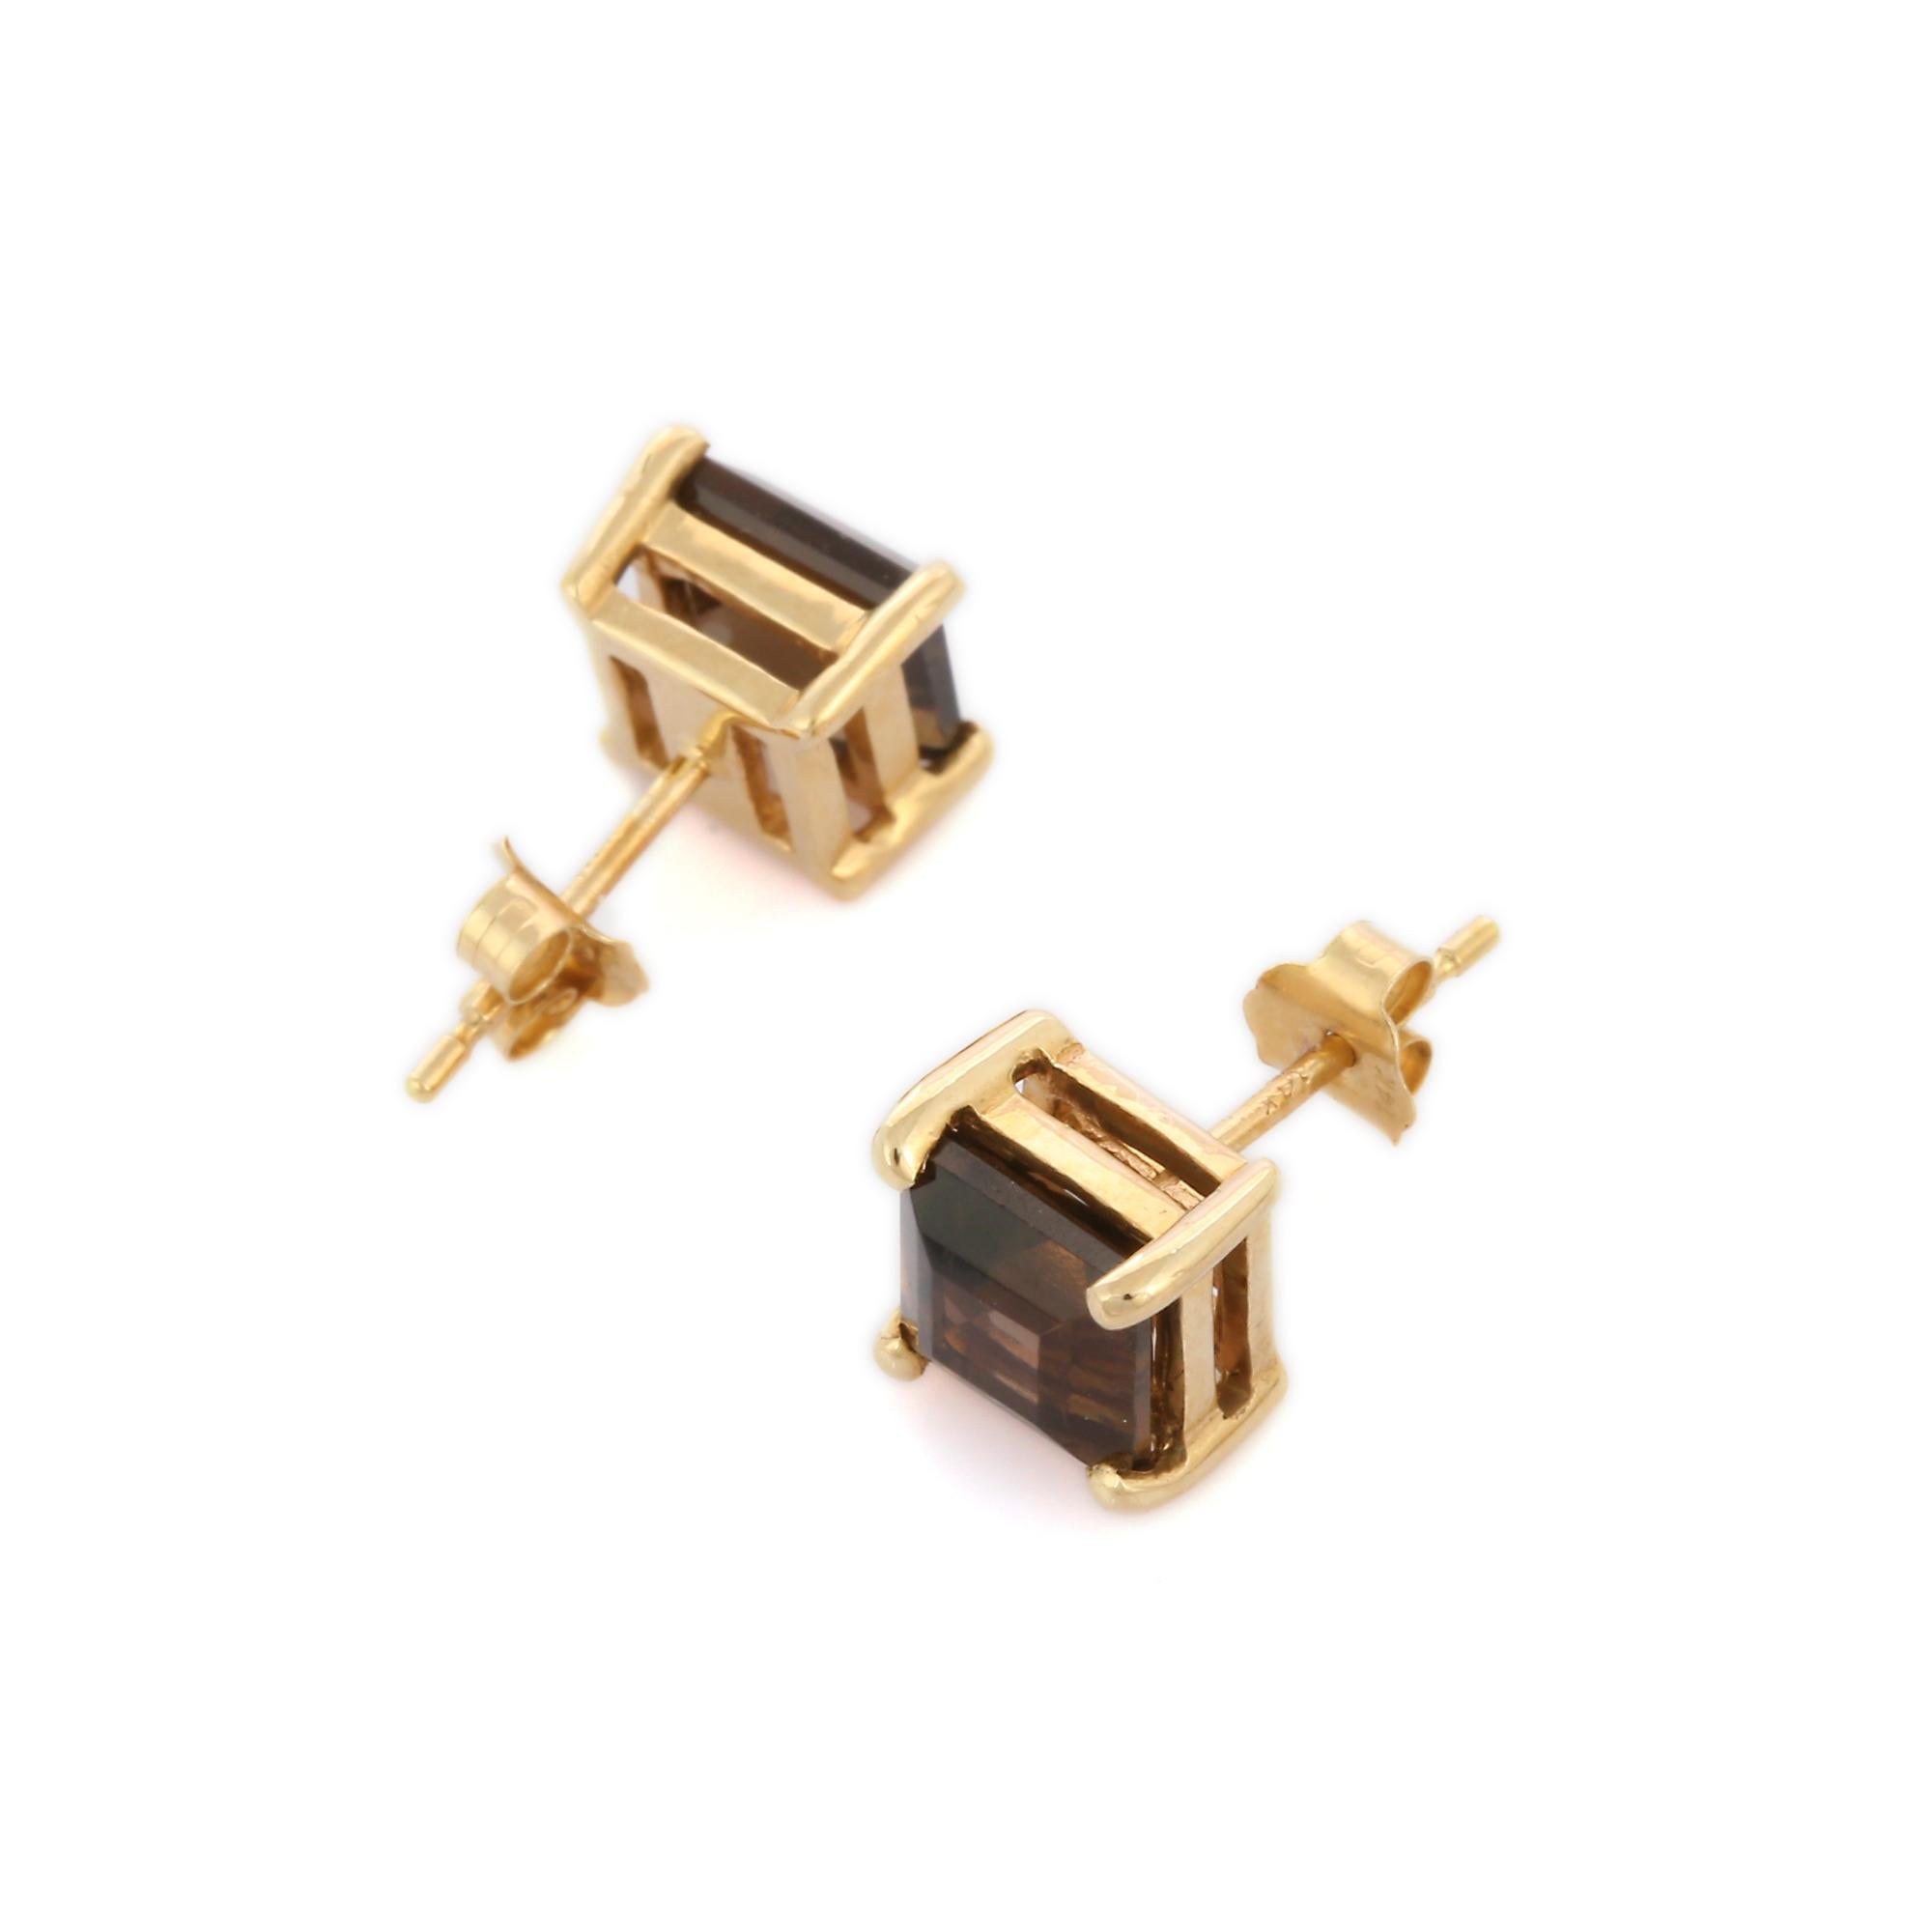 Studs create a subtle beauty while showcasing the colors of the natural precious gemstones.

Square cut smoky quartz studs in 14K gold. Embrace your look with these stunning pair of earrings suitable for any occasion to complete your